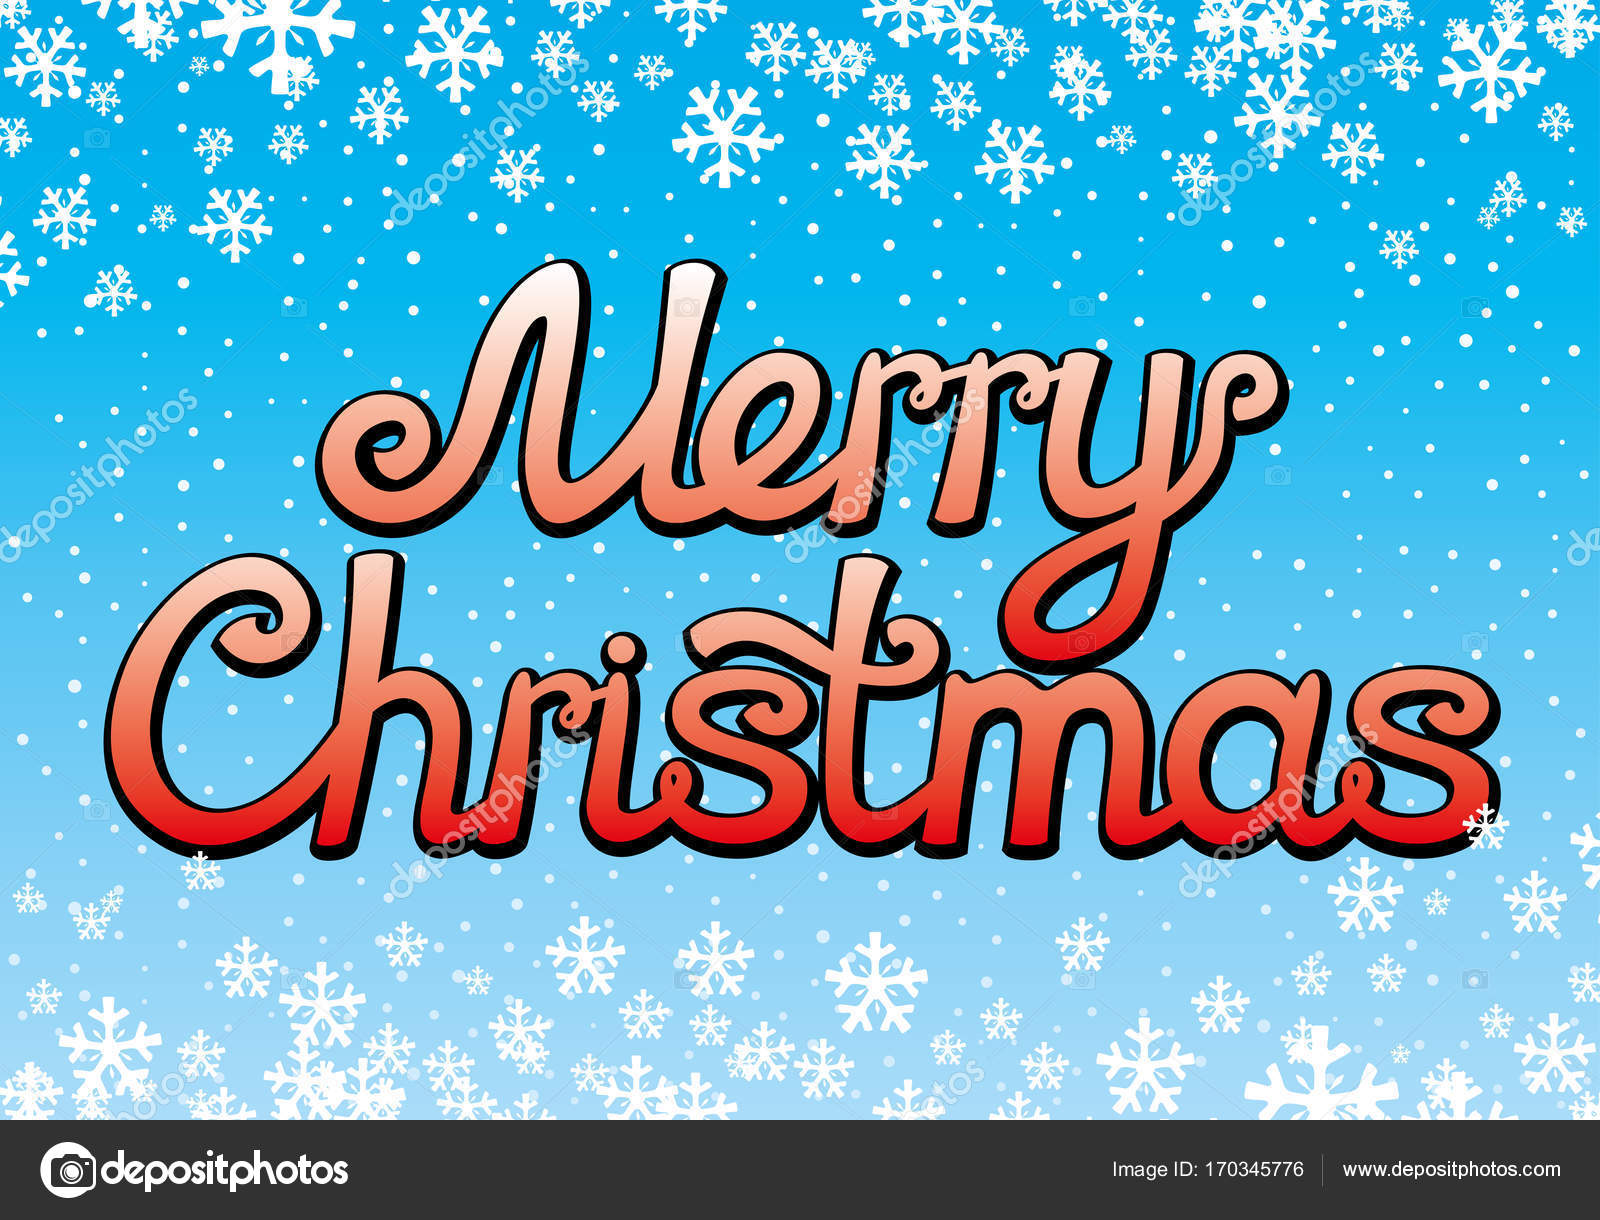 Merry Christmas wishes — Stock Vector